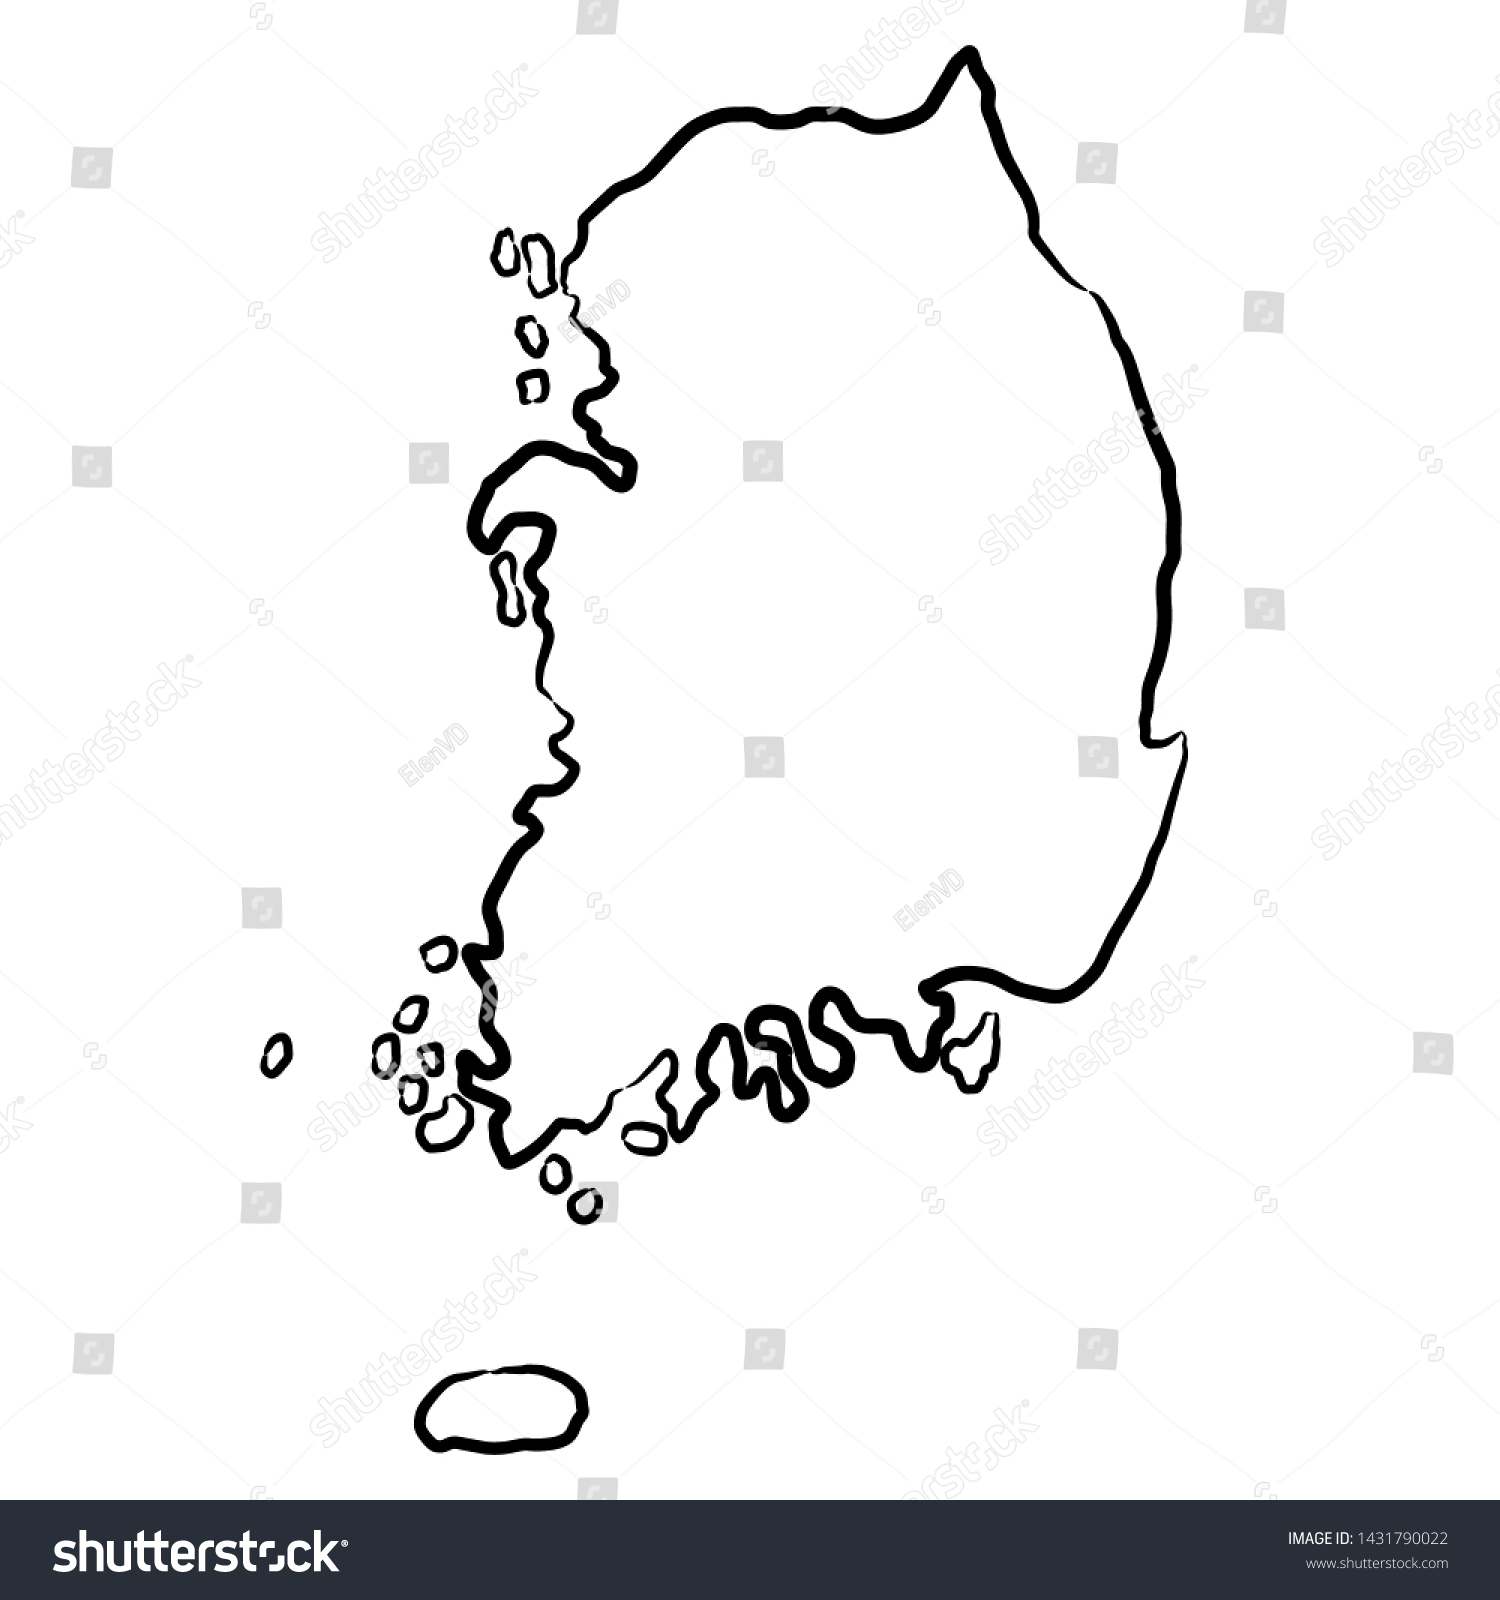 Stock Vector South Korea Map From The Contour Black Brush Lines Different Thickness On White Background Vector 1431790022 